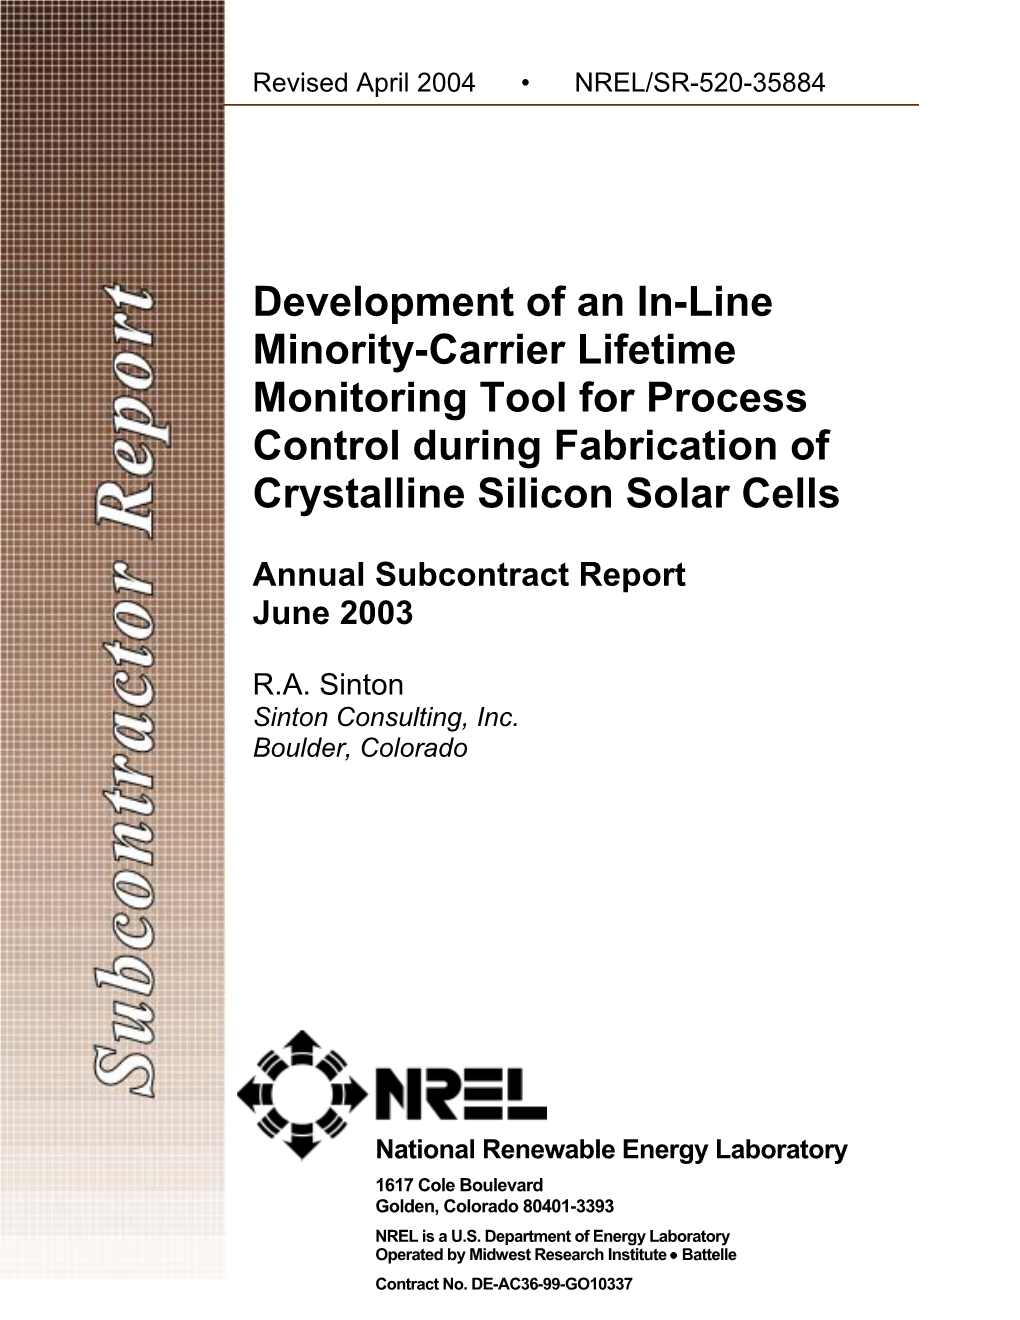 Development of an In-Line Minority-Carrier Lifetime Monitoring Tool for Process Control During Fabrication of Crystalline Silicon Solar Cells